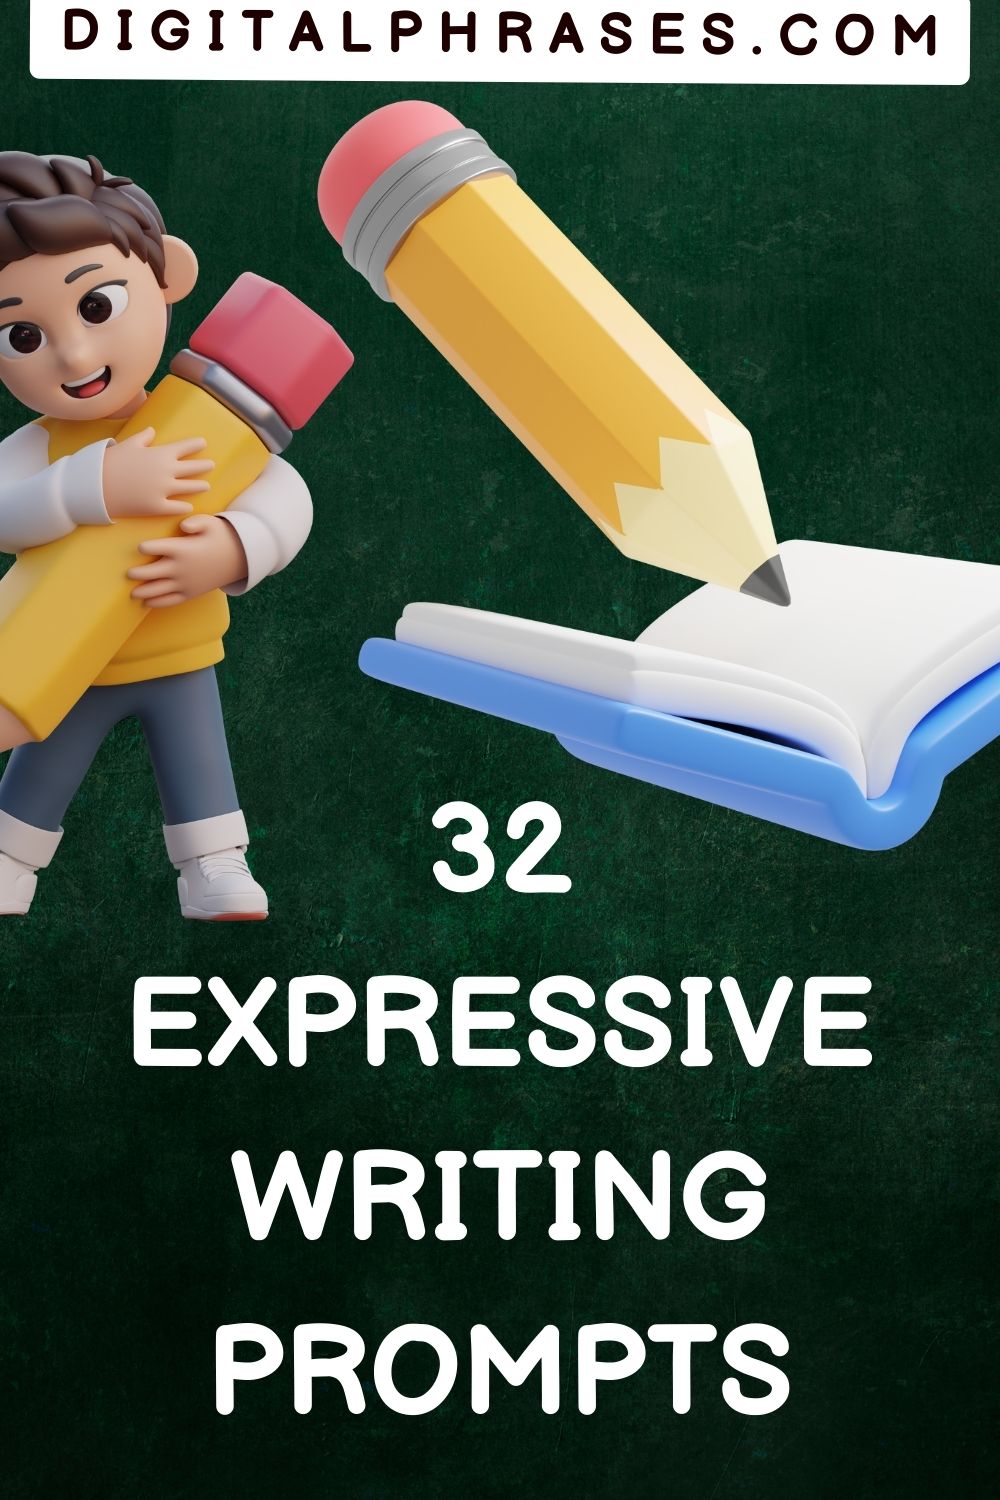 green background image with text - 32 expressive writing prompts